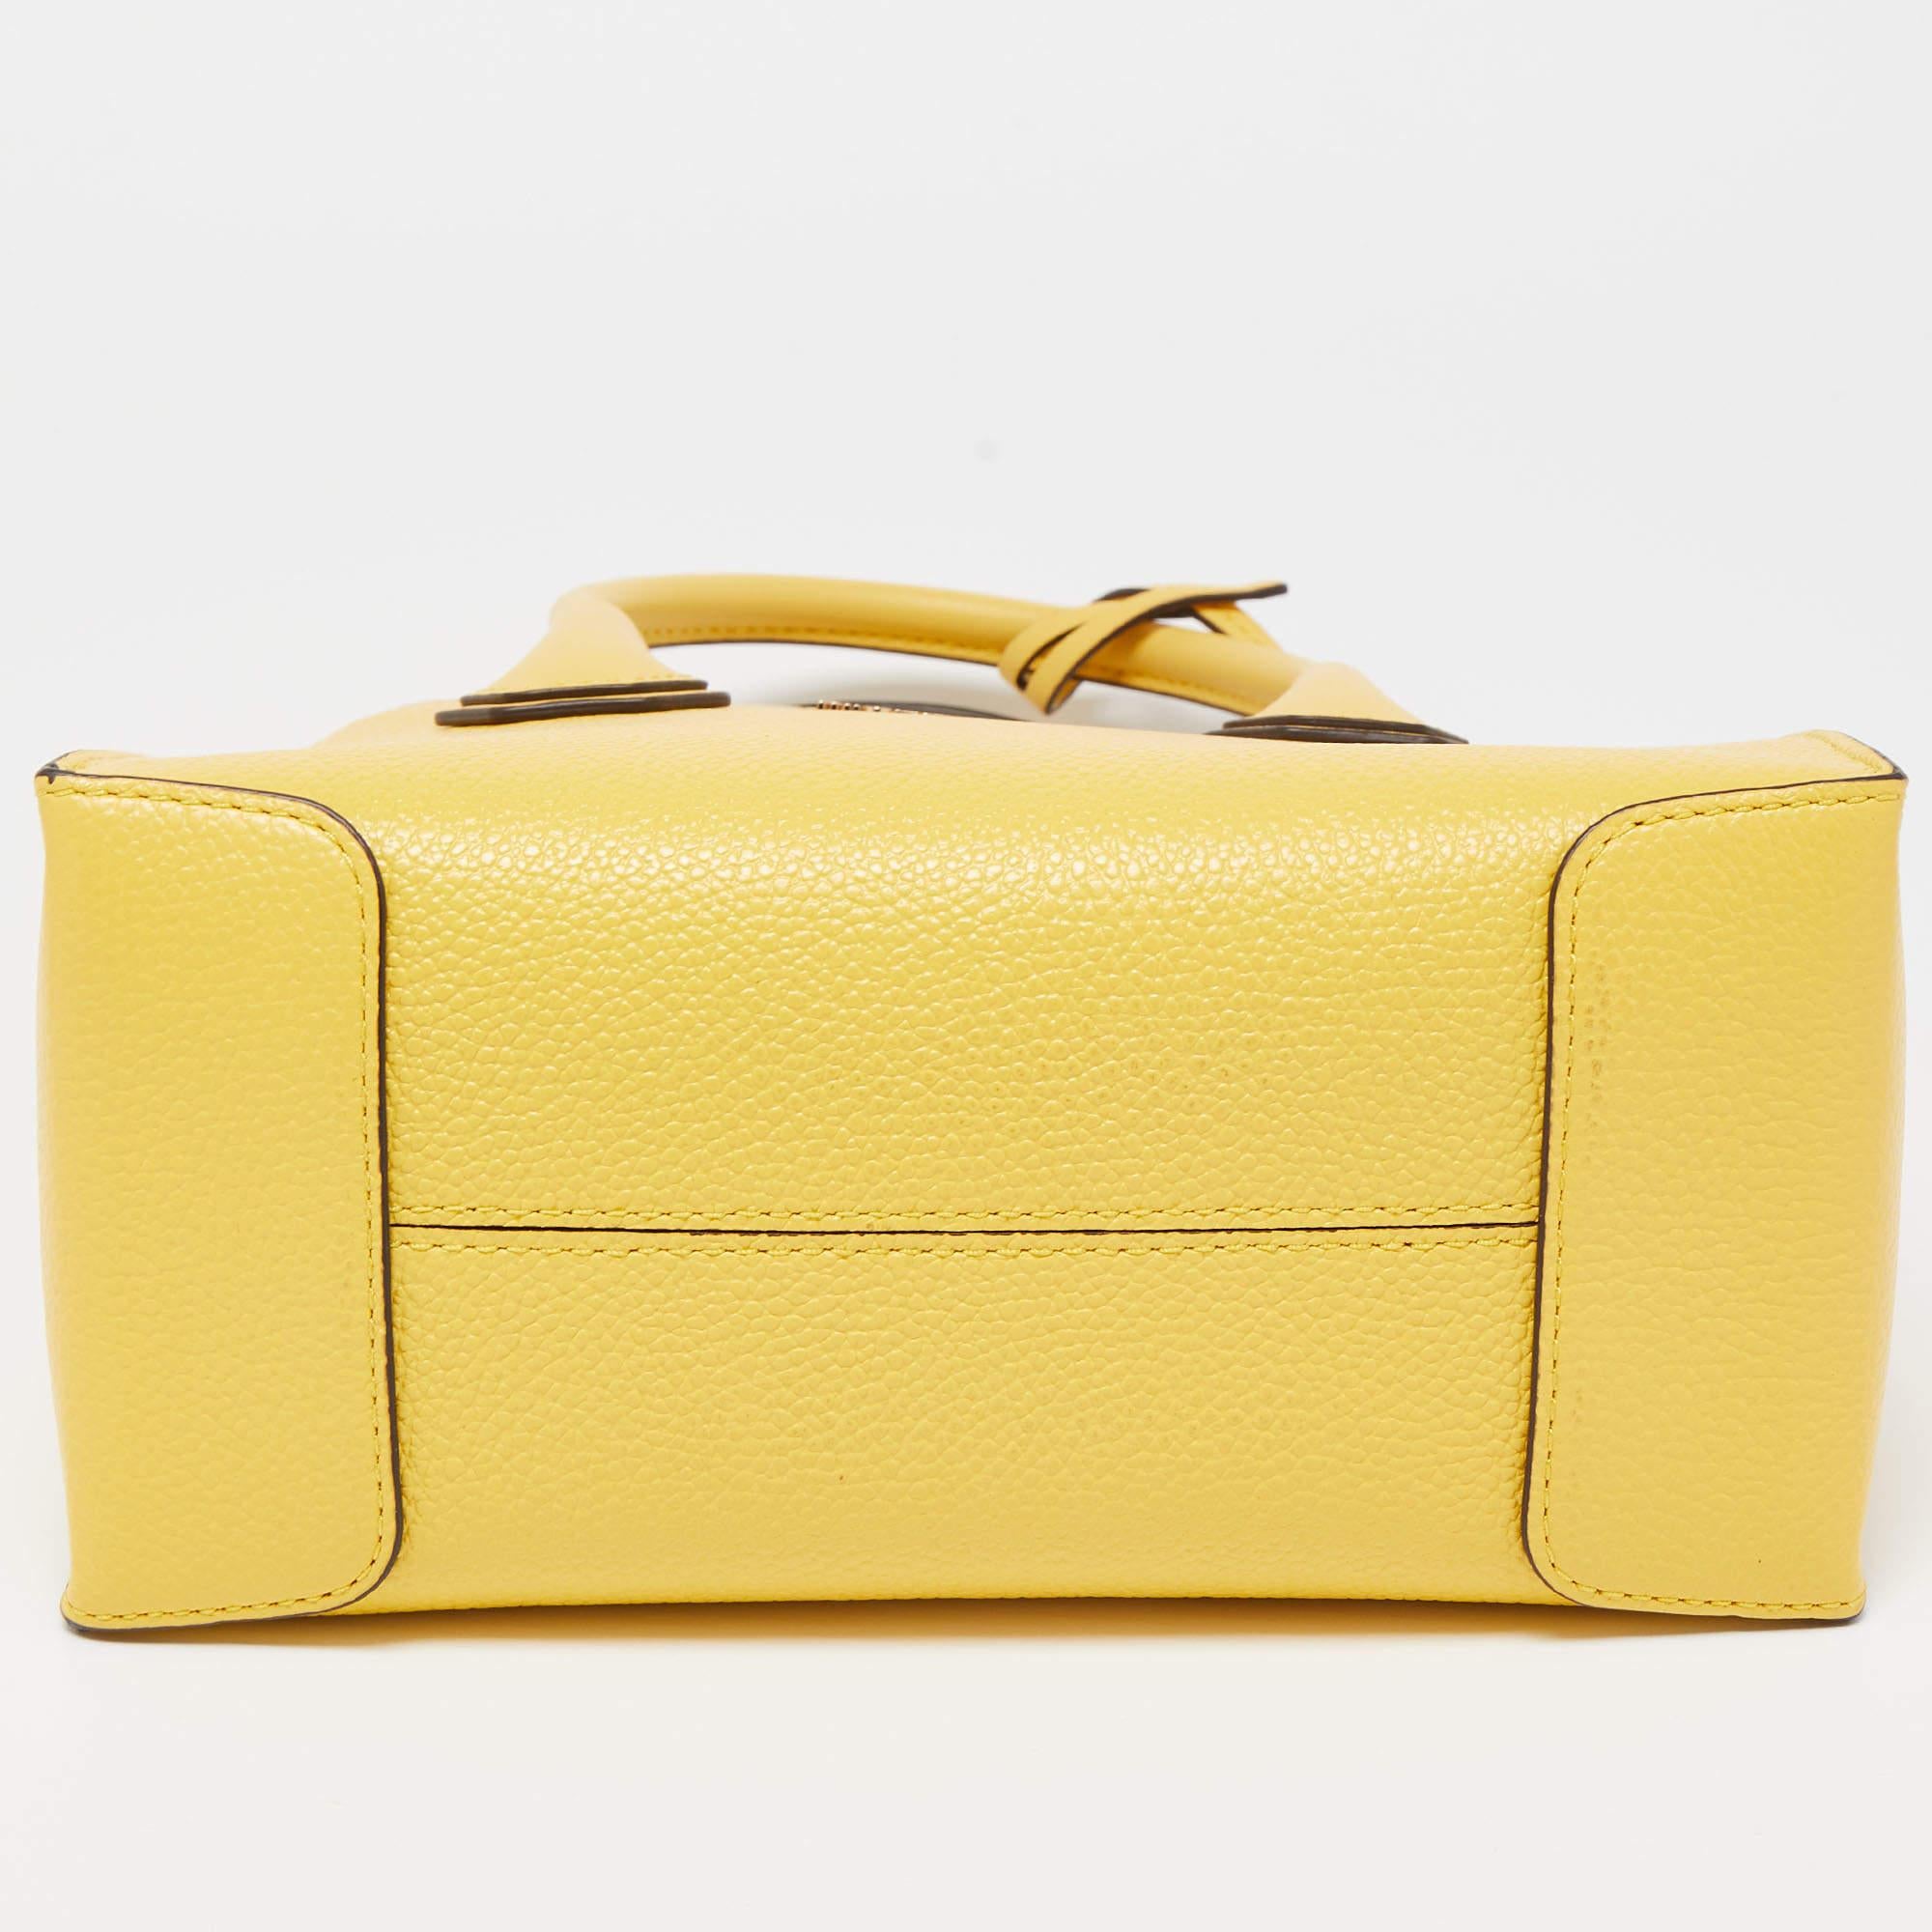 Michael Kors Yellow Leather Mercer Tote For Sale 5